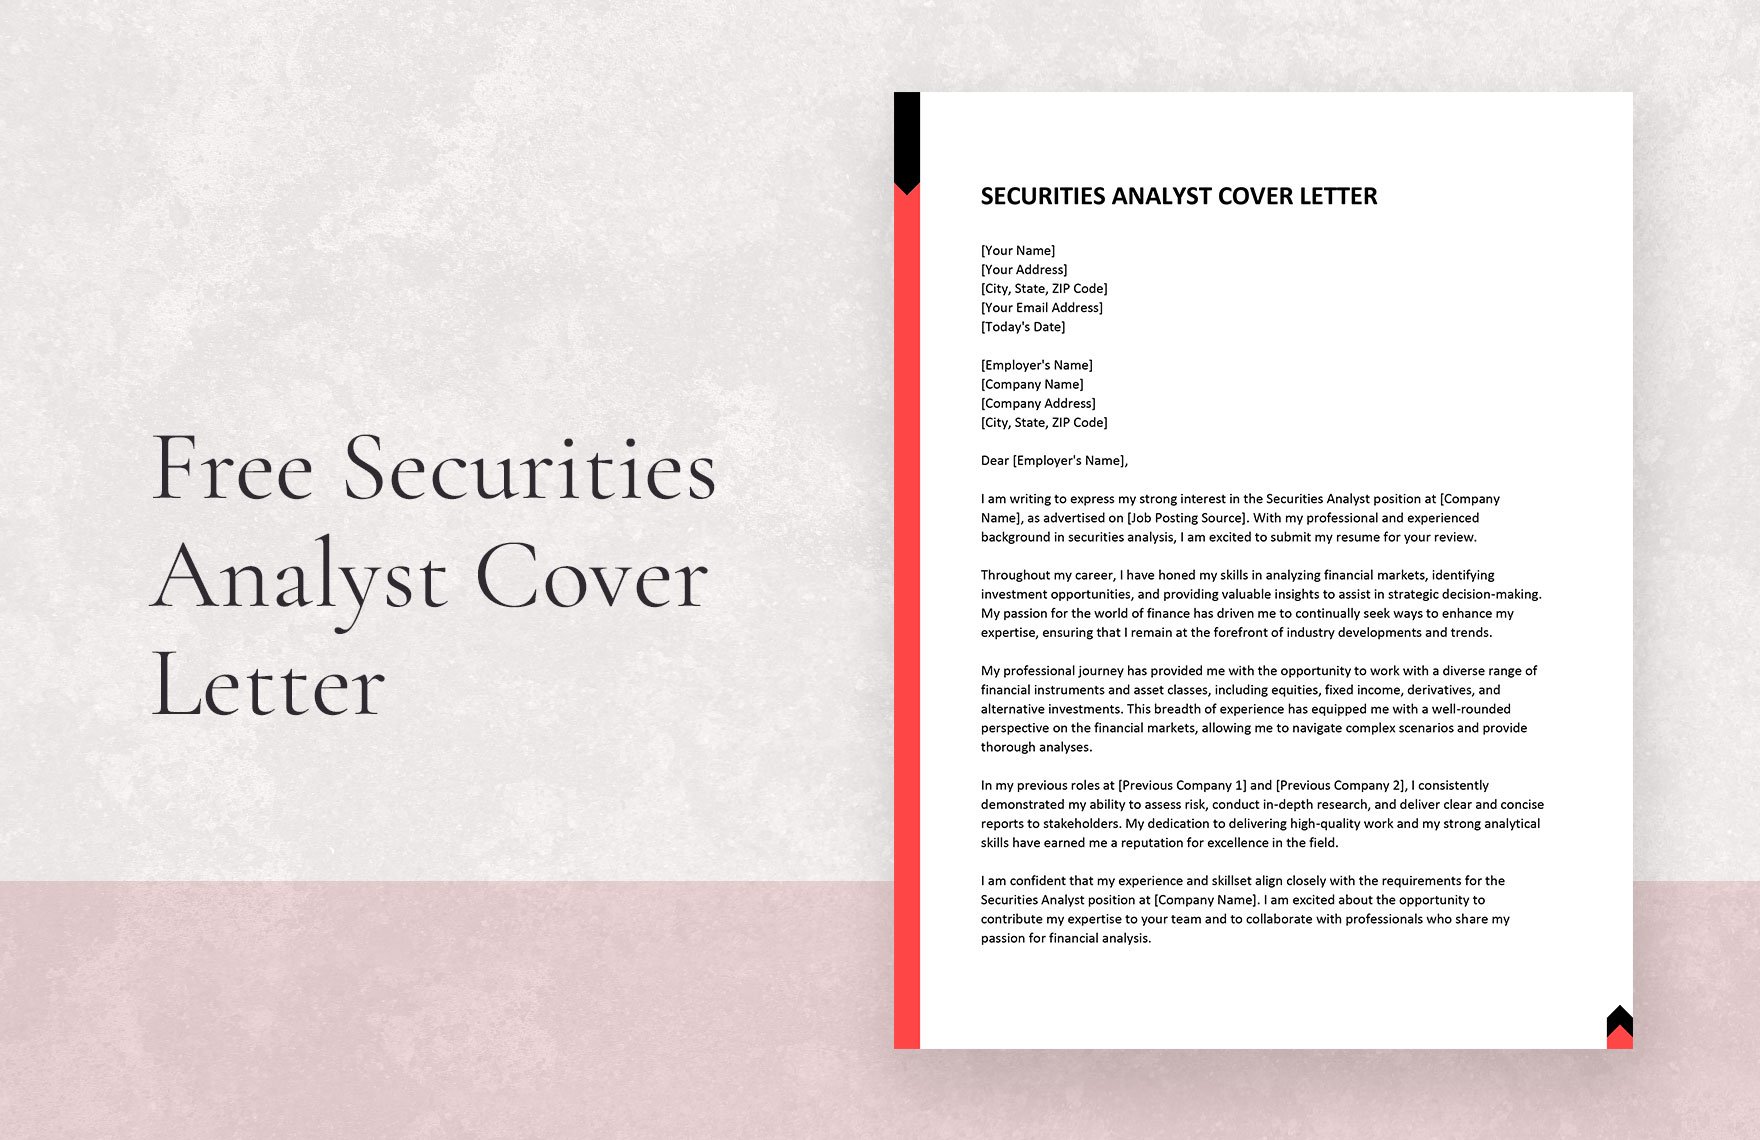 Free Securities Analyst Cover Letter in Word, Google Docs, Apple Pages